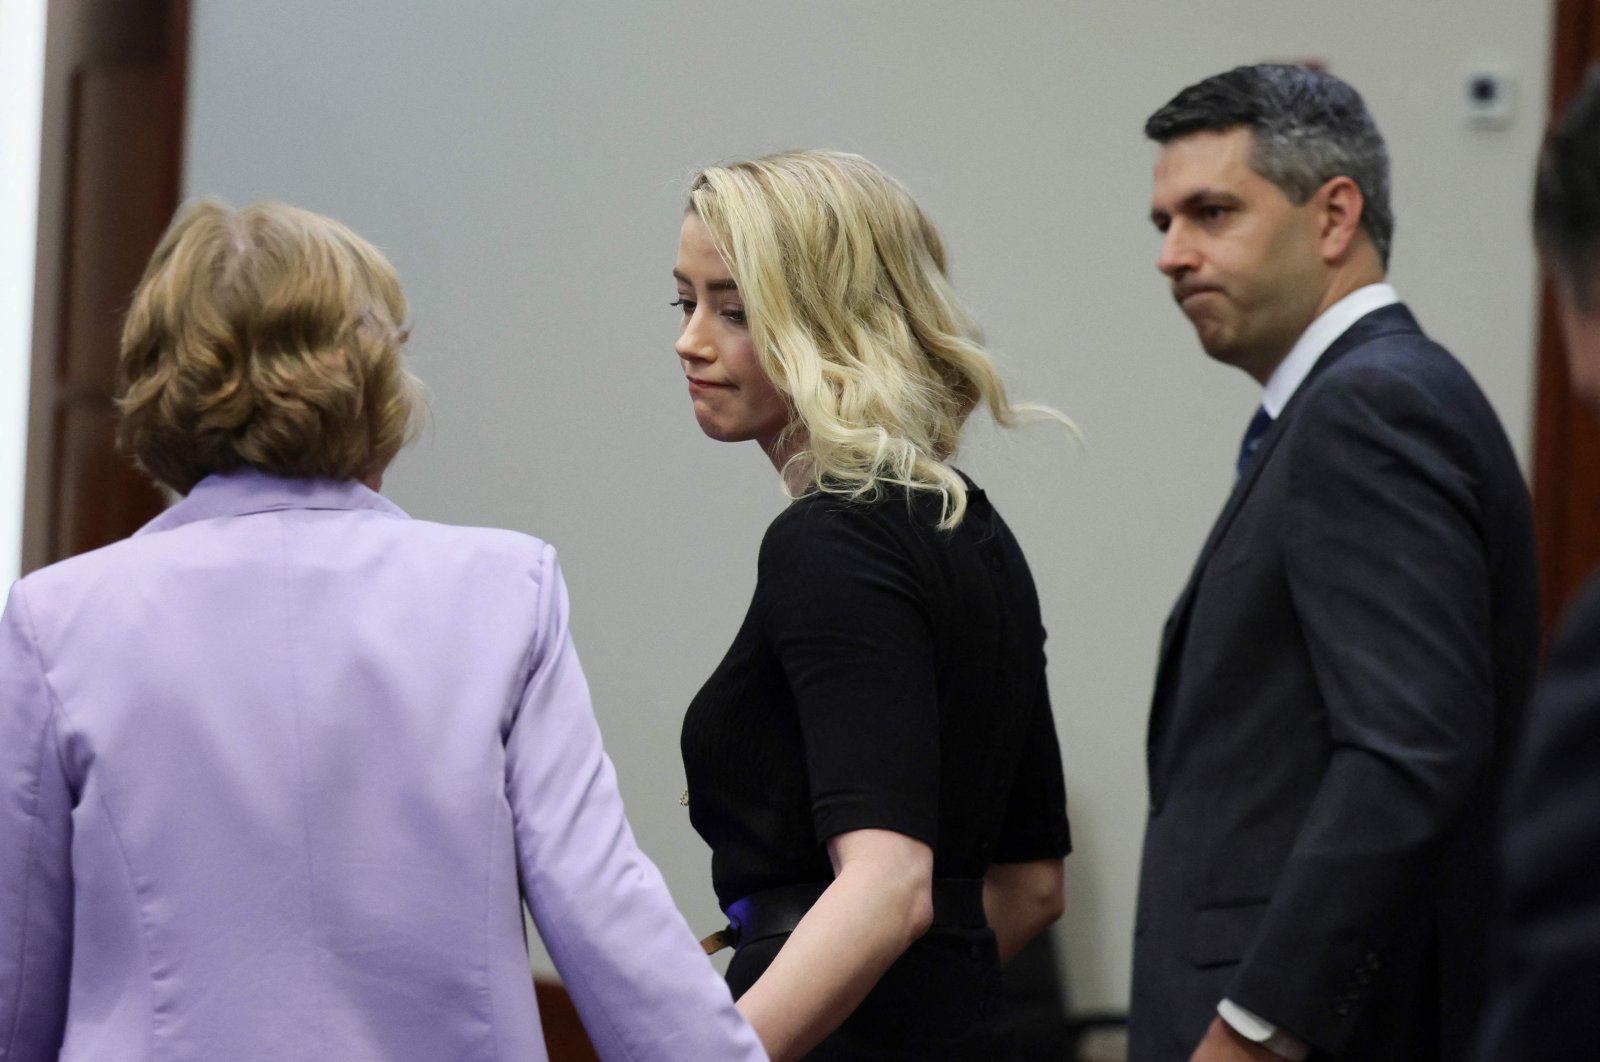 U.S. actor Amber Heard looks to her lawyer Elaine Bredehoft after the jury announced a split verdict in favor of both Johnny Depp and Amber Heard on their claim and counter-claim in the Depp v. Heard civil defamation trial at the Fairfax County Circuit Courthouse in Fairfax, Virginia, U.S., June 1, 2022. (AFP Photo)